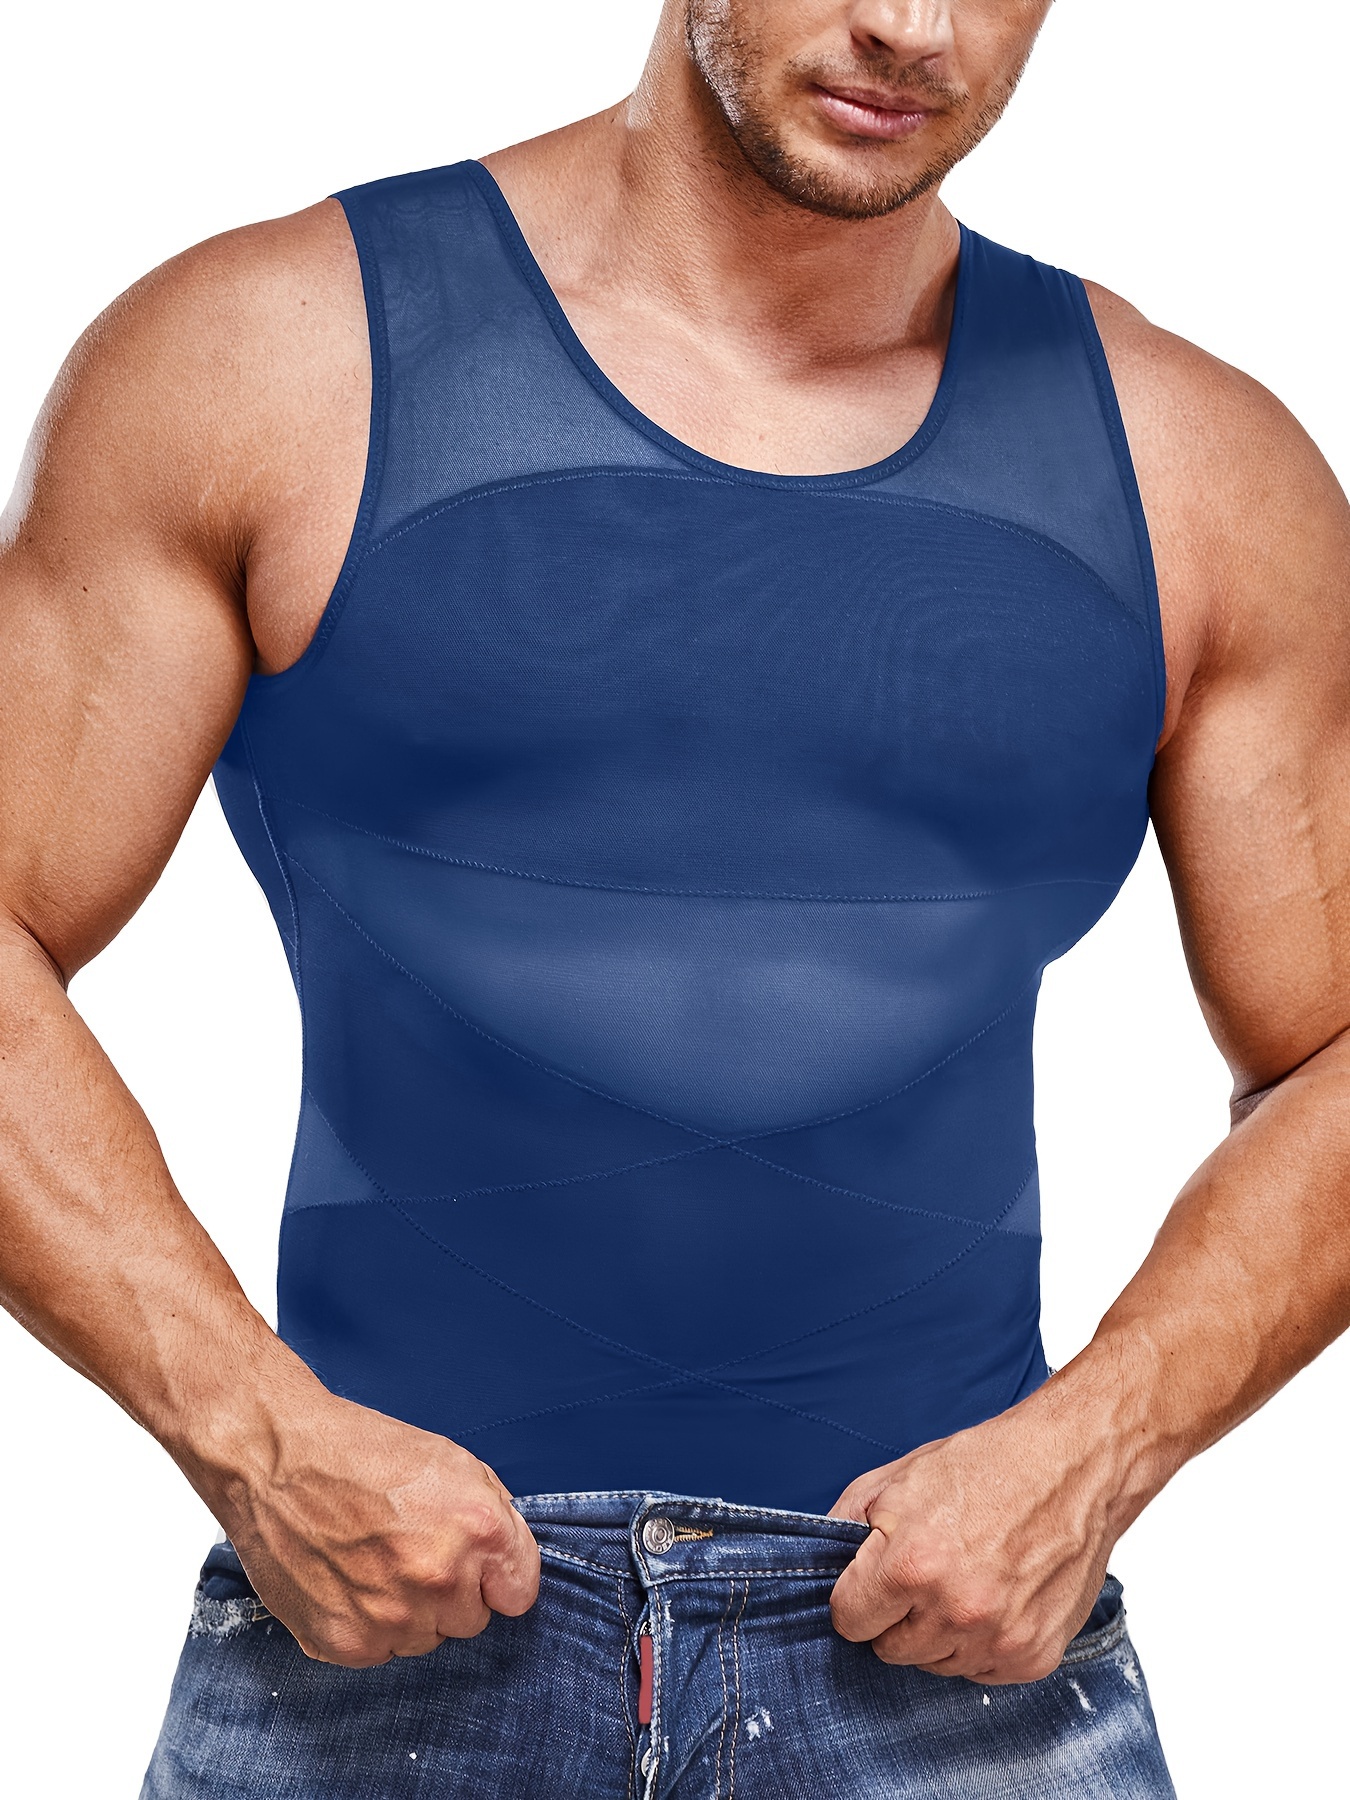  Men's Compression Shirt Seamless Short Sleeve Tank Top Body  Shaper Slimming T-Shirt Athletic Sports Running Shaperwear (White, M) :  Clothing, Shoes & Jewelry